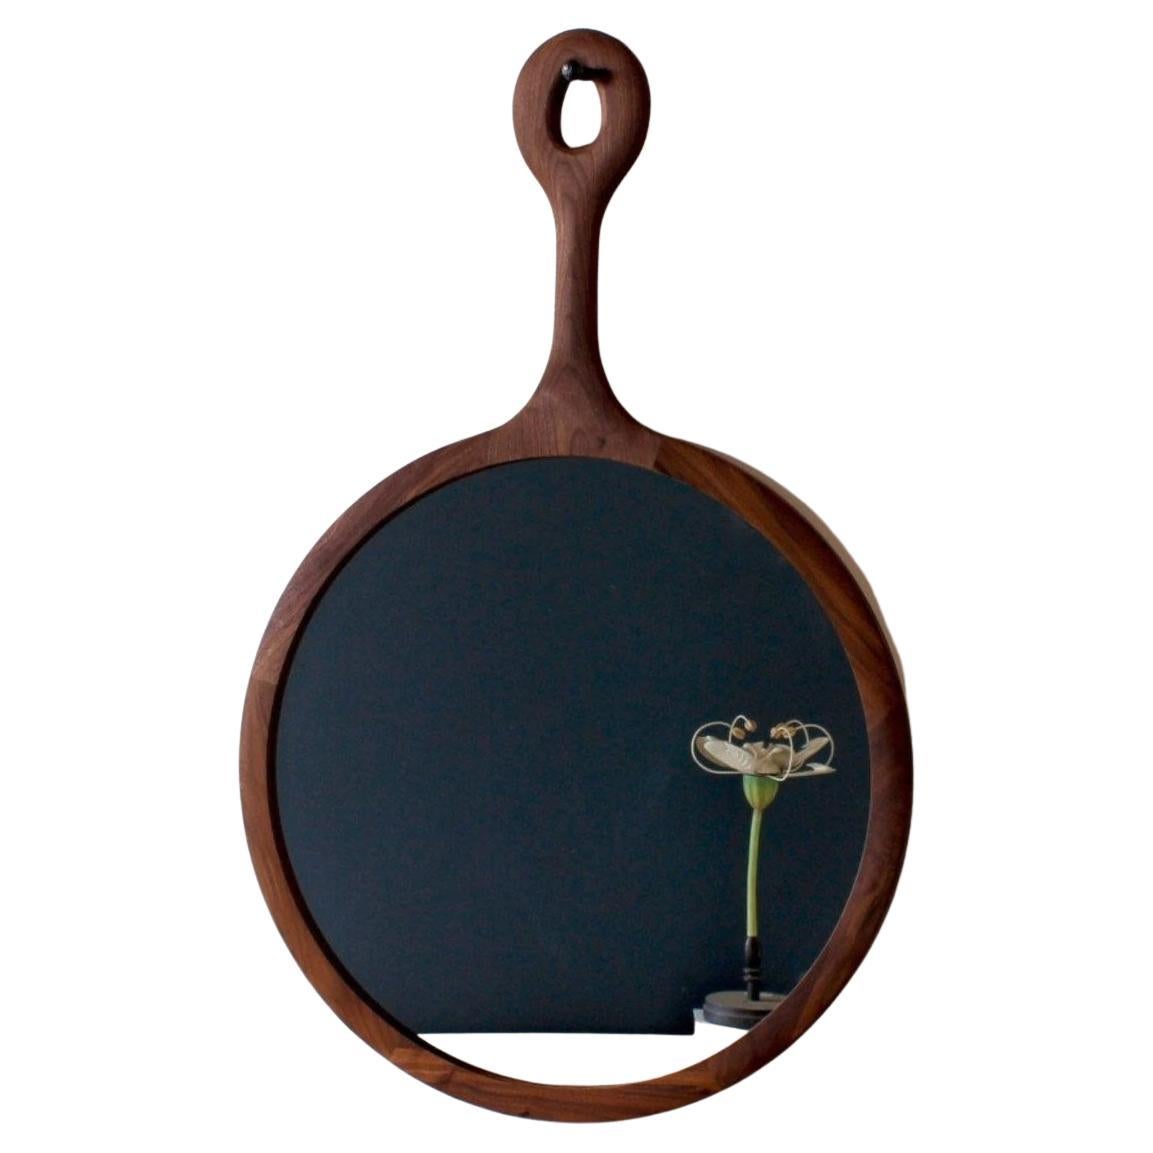 The Sophia mirror is framed in wooden dark maple with a long neck resembling an oversized hand mirror. Handcrafted in Pennsylvania, the Sophia comes with a hand-hammered iron peg for hanging. The medium is a lovely size above a dresser or in a